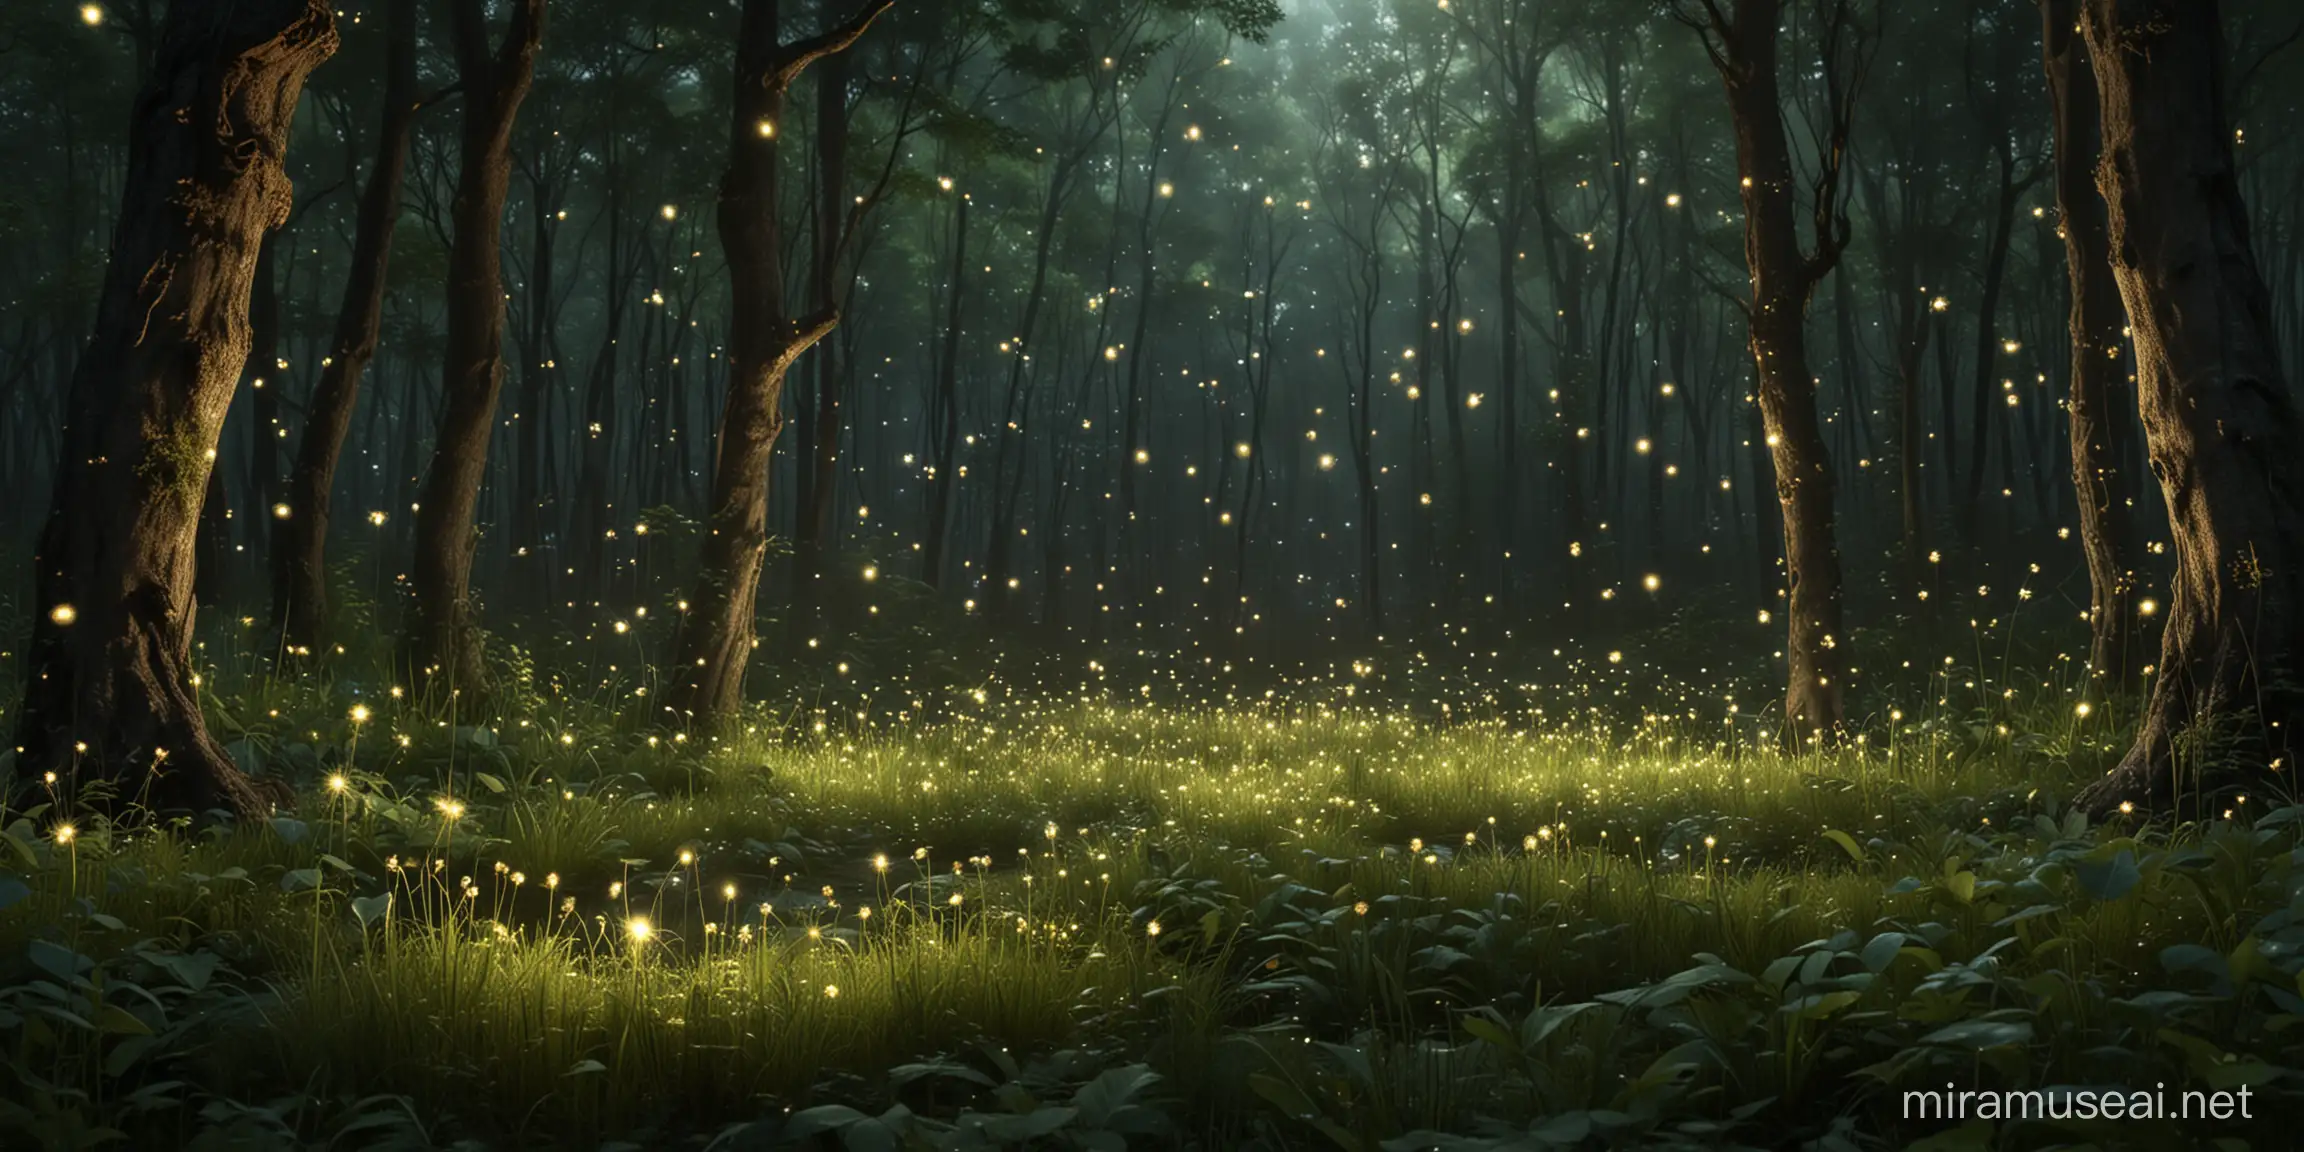 Enchanted Forest Illuminated by Magical Fireflies and Fairies